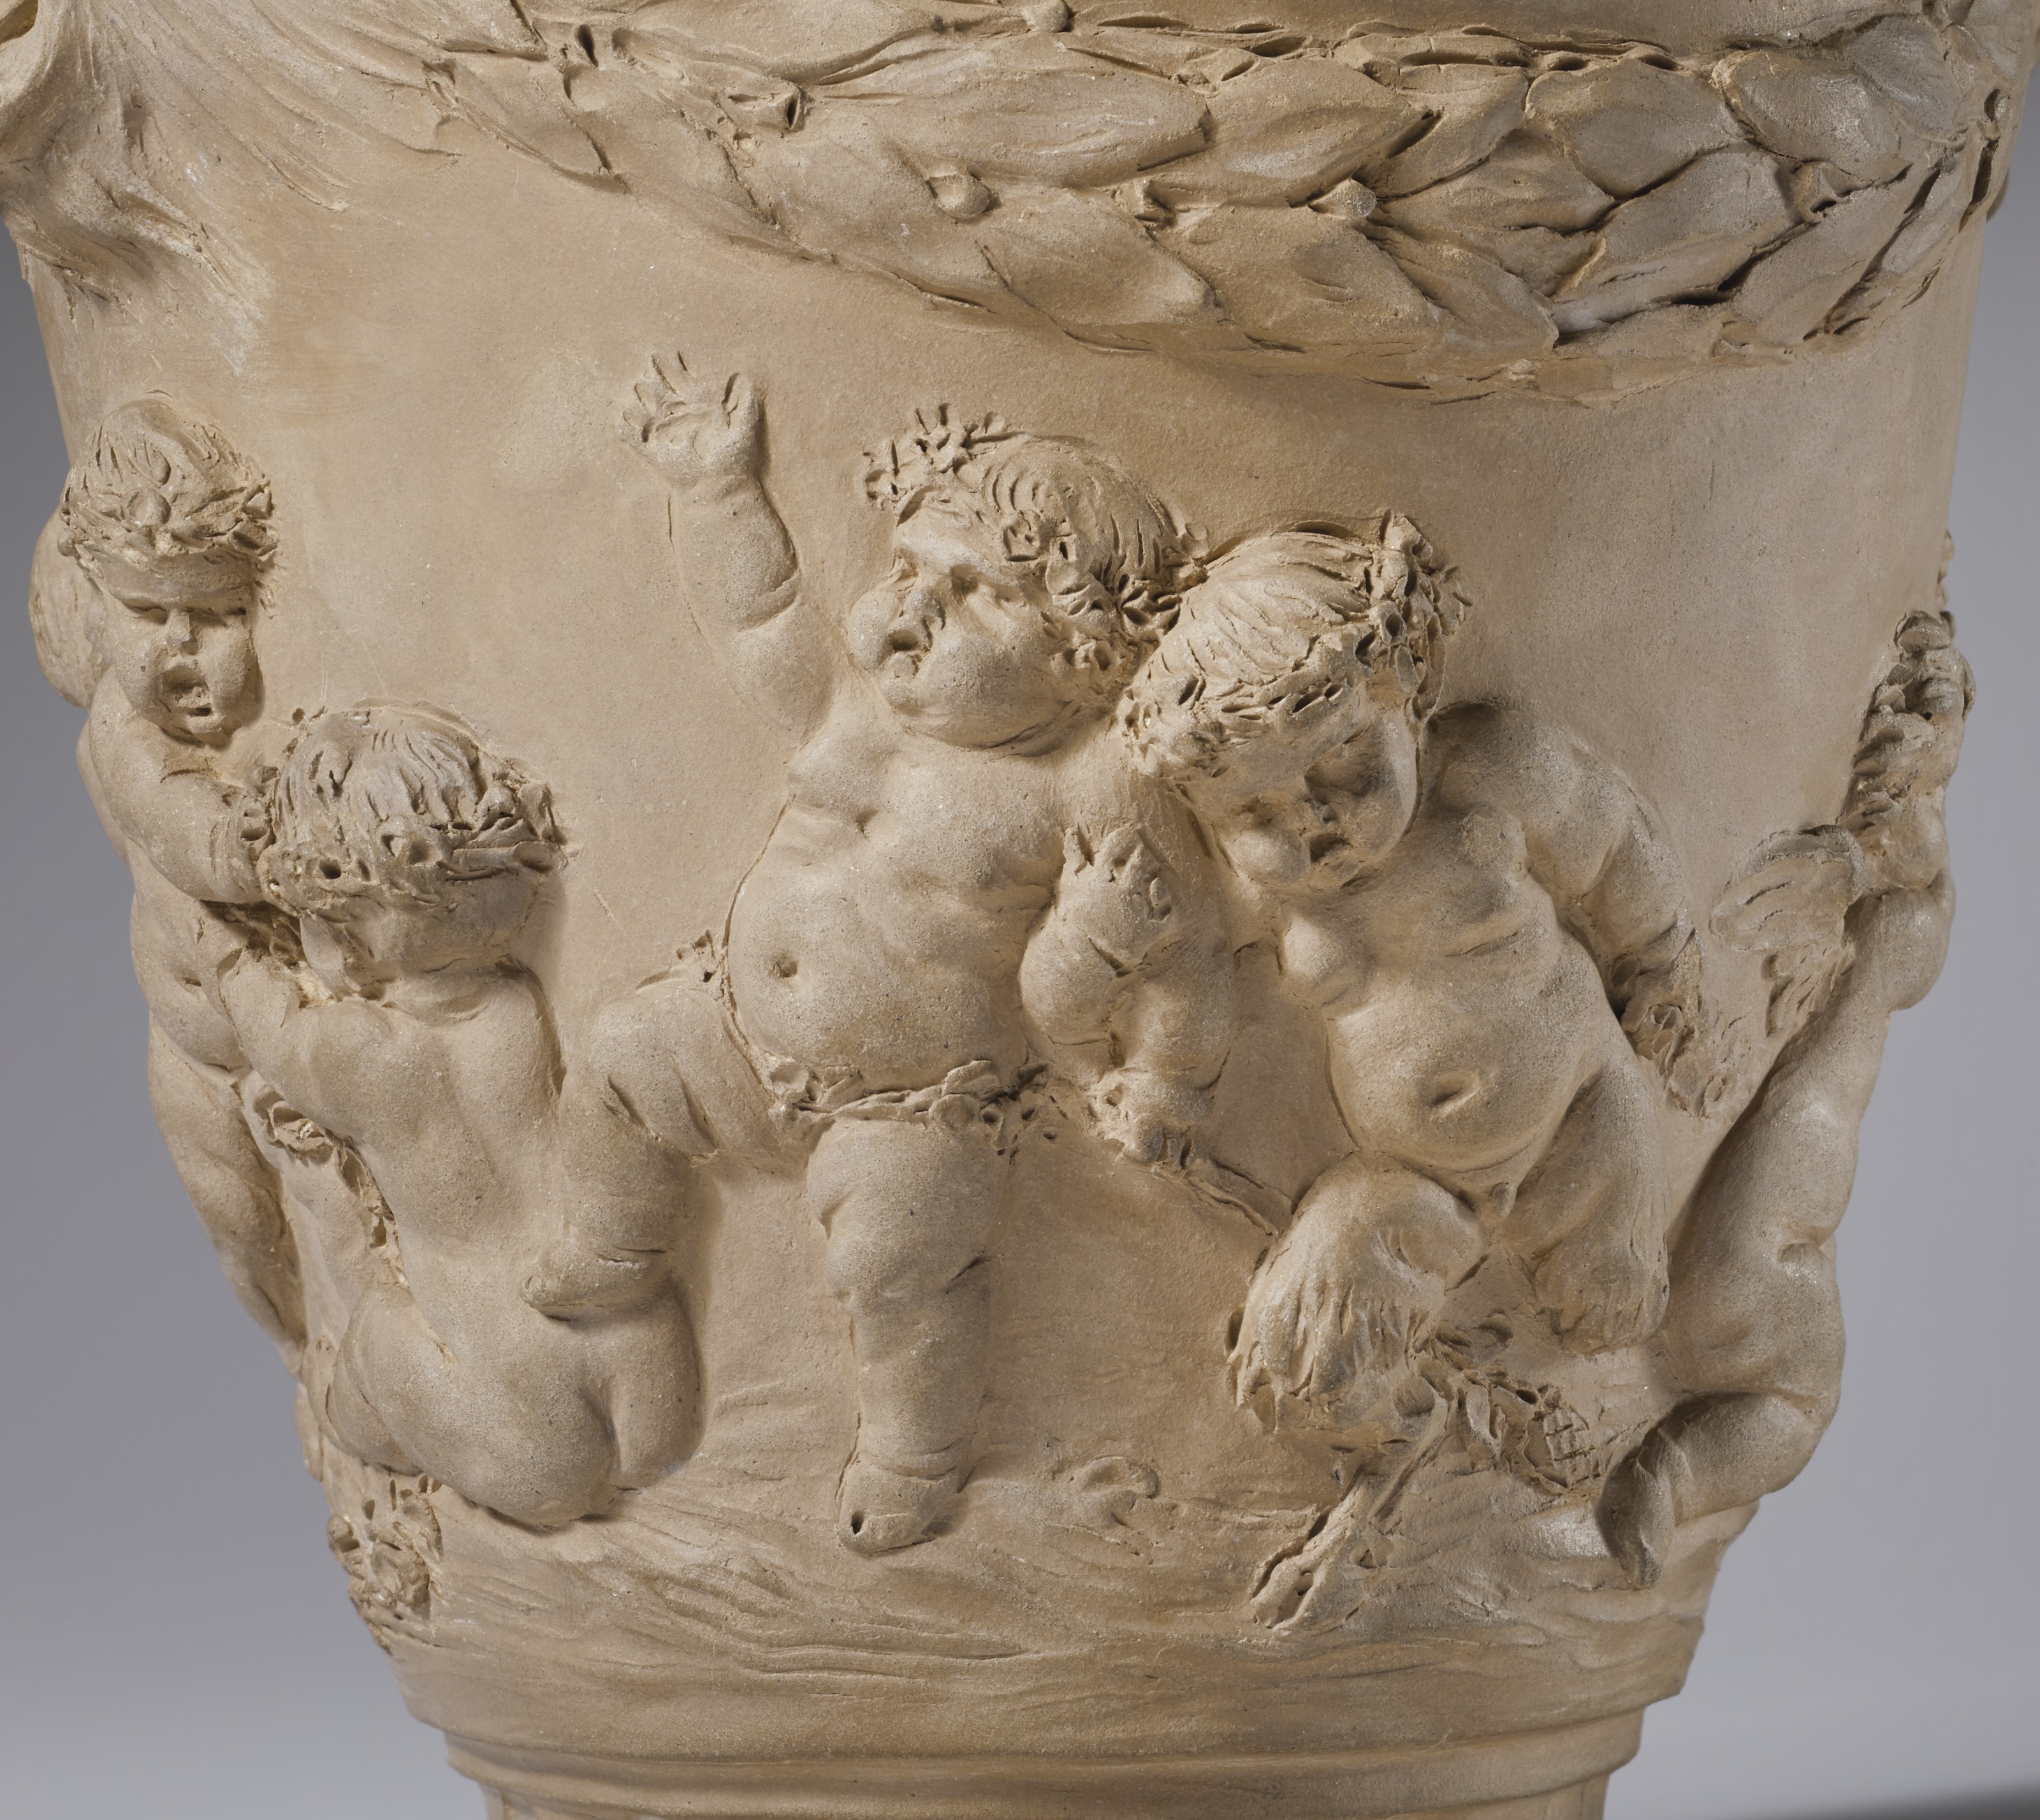 Artwork by Claude Michel Clodion, A TERRACOTTA VASE OF PUTTI WITH GROTESQUE HANDLES, Made of TERRACOTTA